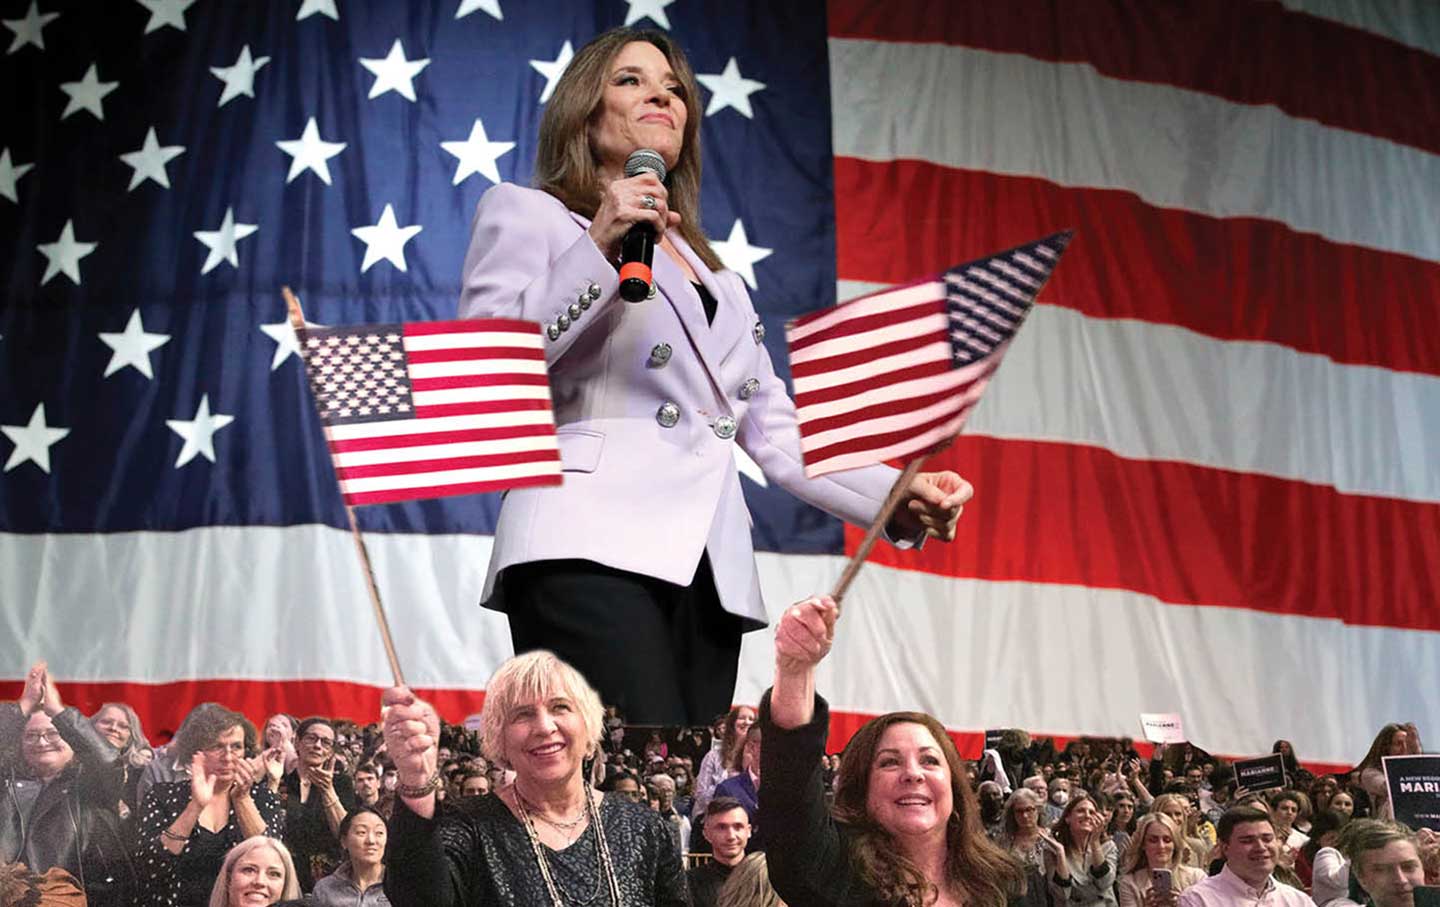 “It’s Marianne or Death”: On the Campaign Trail With Marianne Williamson